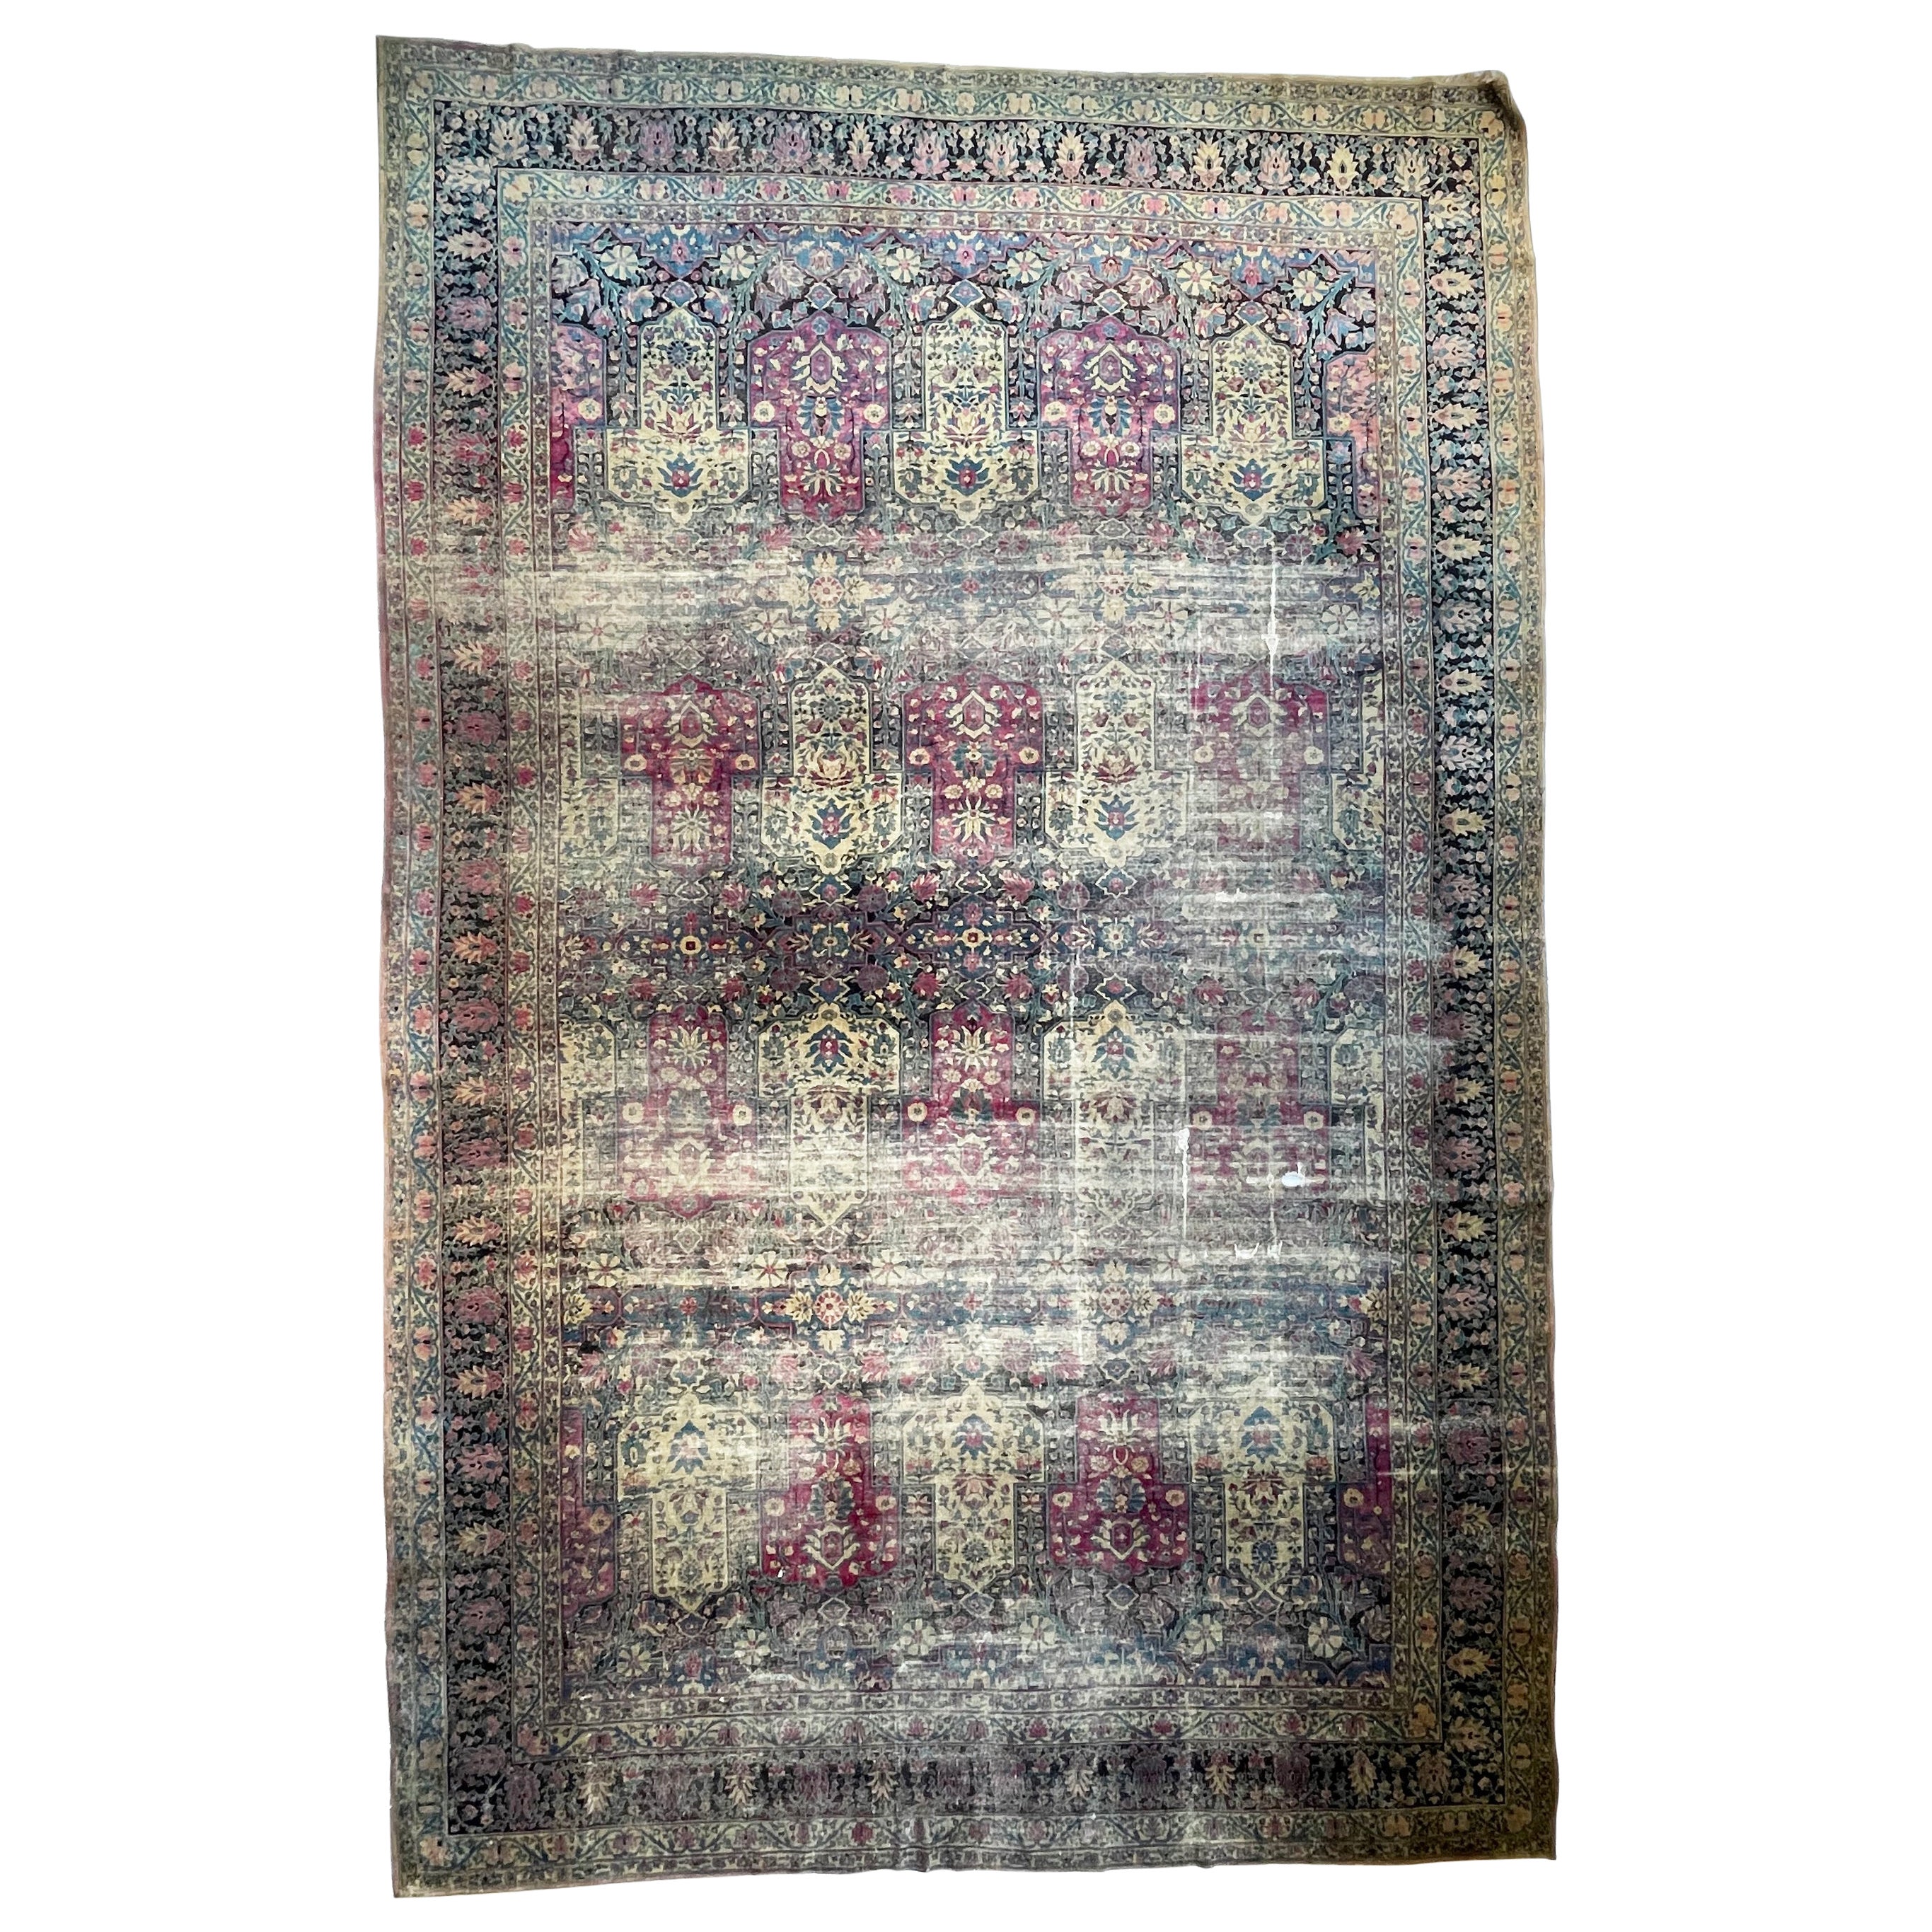 Palace Size Antique Rug with Iconic Garden Inspired Design, circa 1900's For Sale